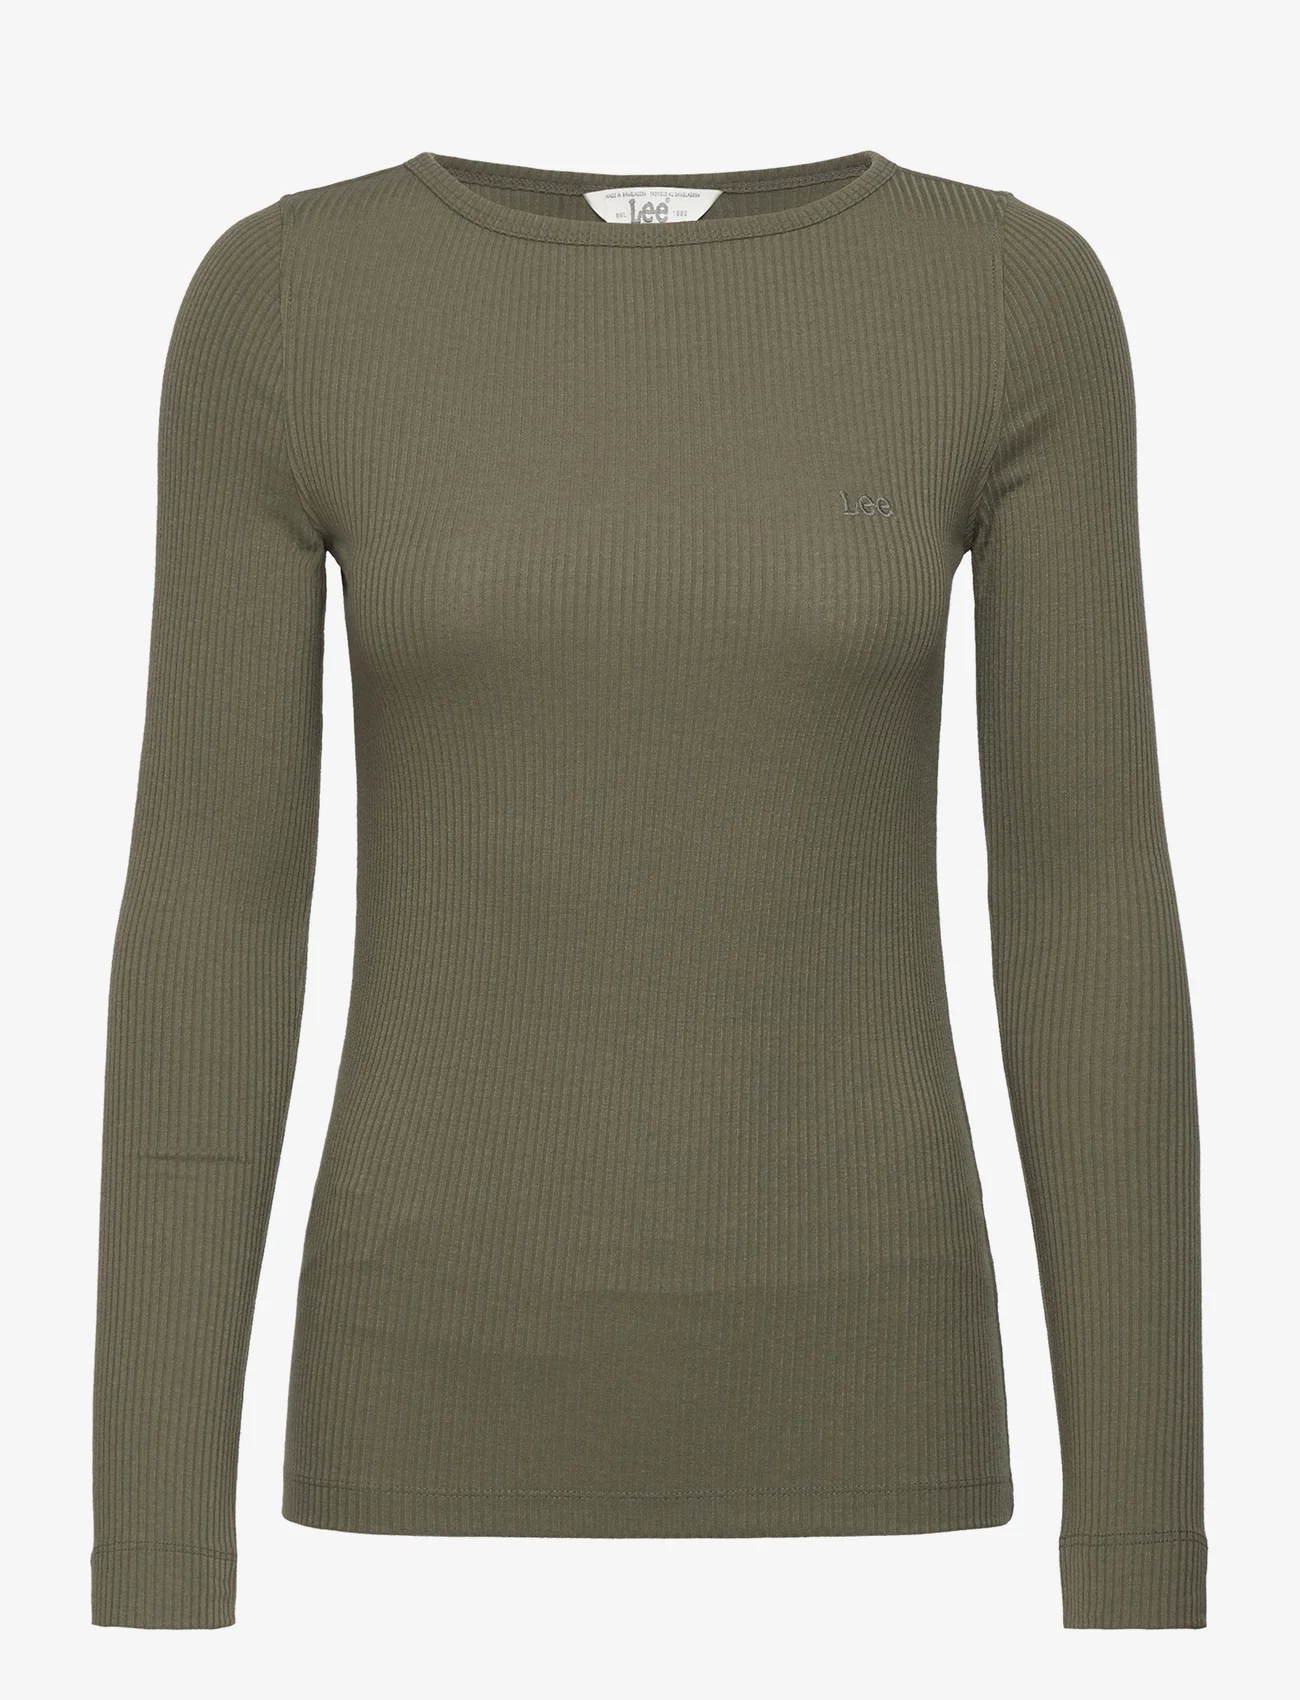 Lee Jeans - LS BOAT NECK TEE - long-sleeved tops - olive grove - 0